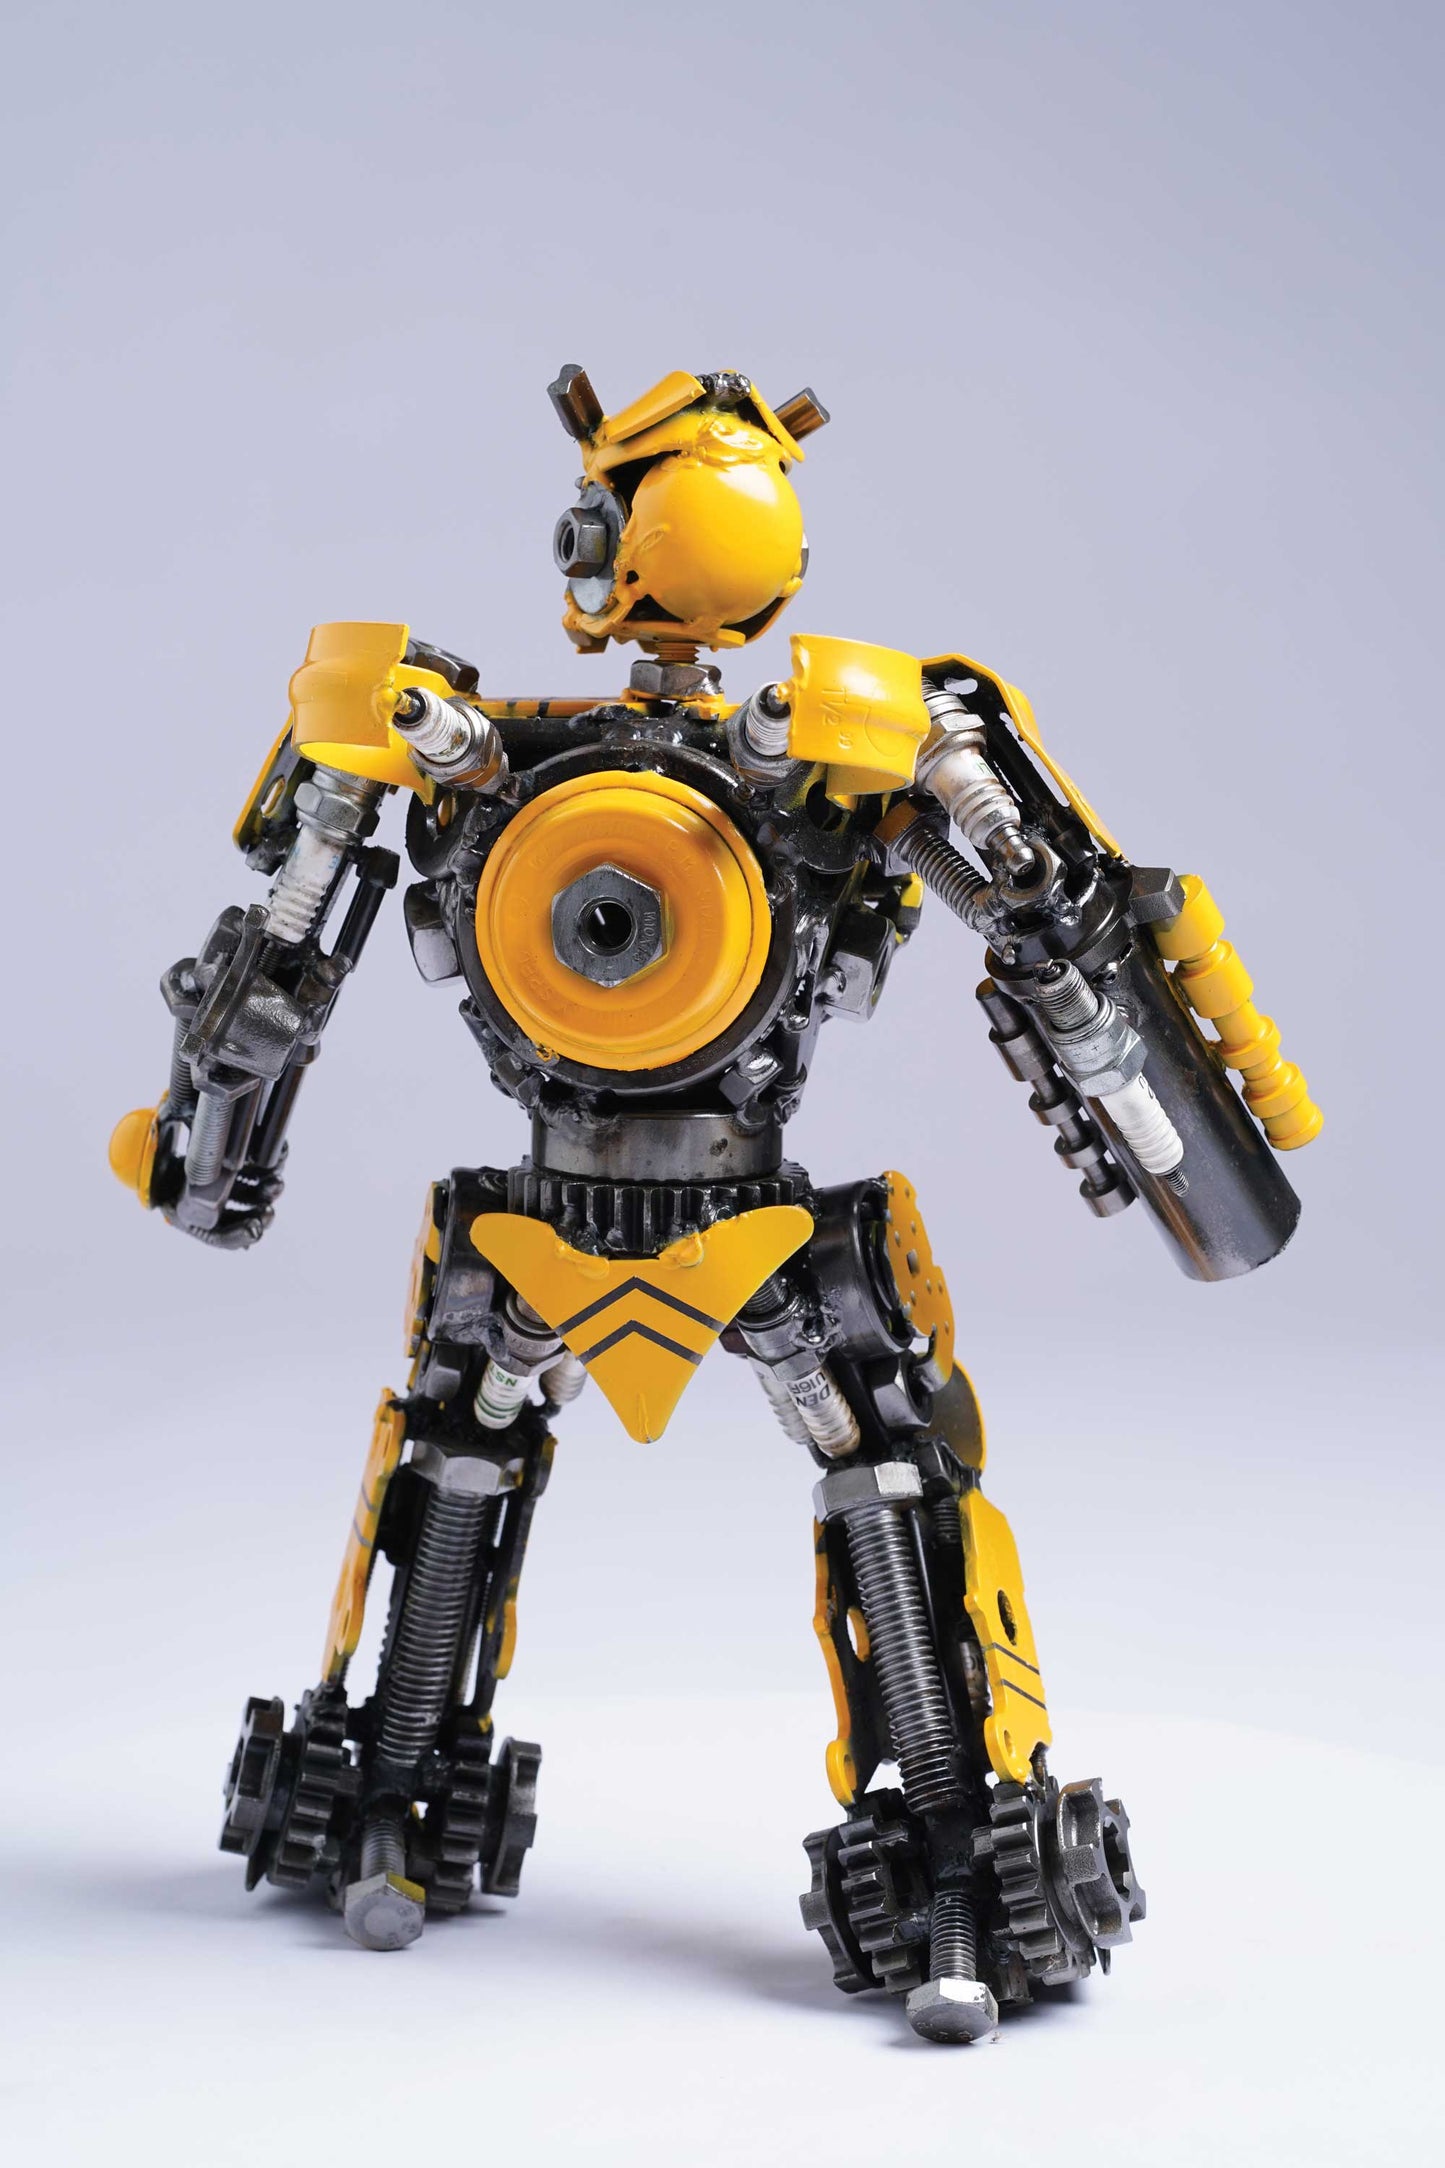 Transformers Bumblebee metal action figure hand-crafted from junk auto parts with attention to detail